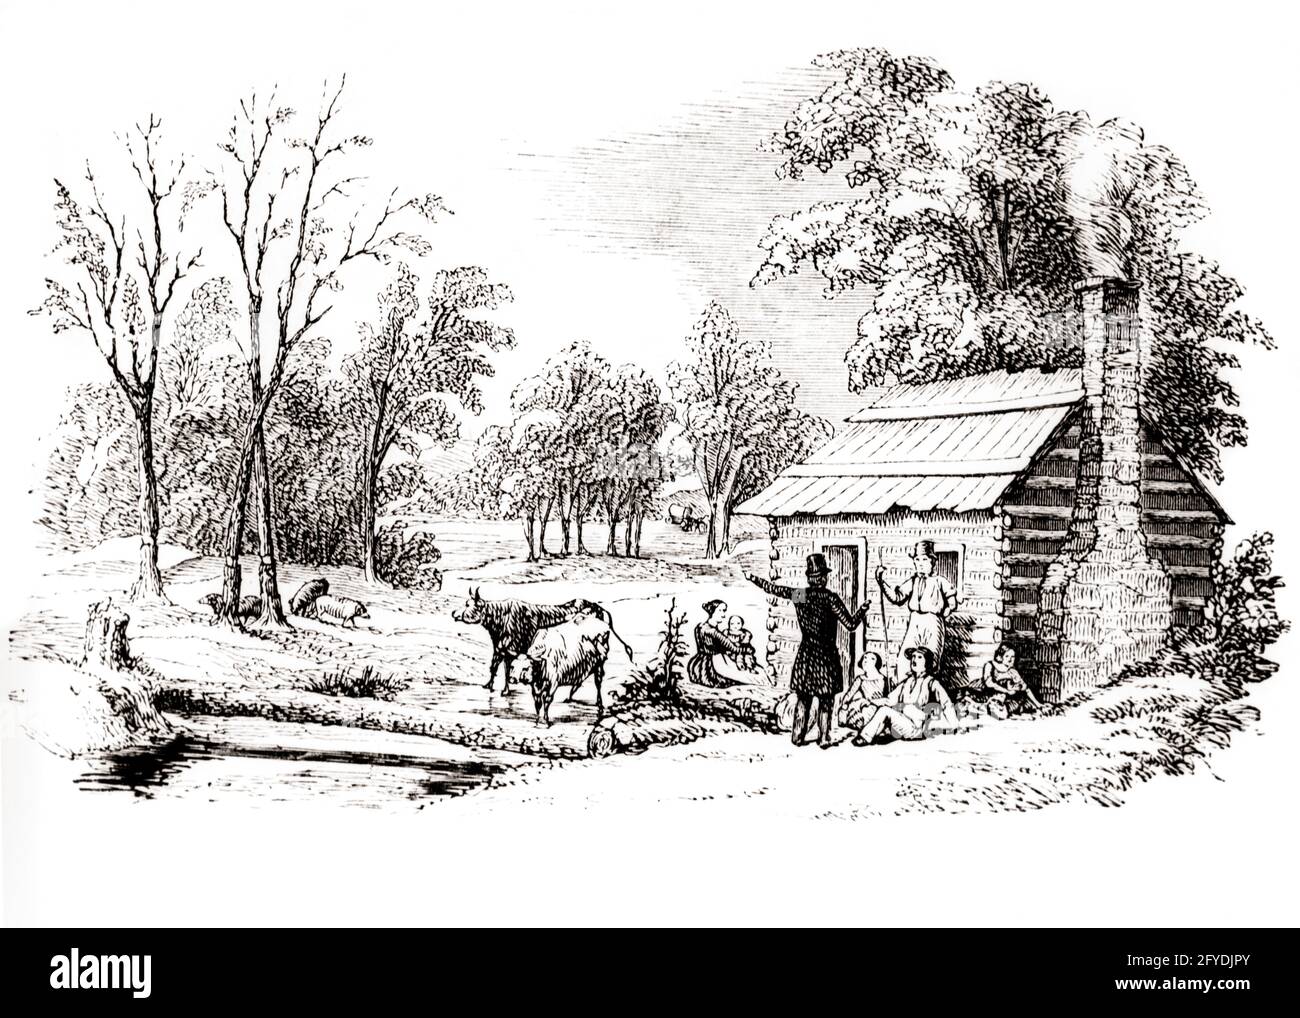 1800s ENGRAVING OF THE WESTERN HOME SETTLERS ASSEMBLED MEETING STANDING SITTING IN FRONT OF FRONTIER LOG CABIN TWO CATTLE - o3159 HAR001 HARS FEMALES MARRIED RURAL SPOUSE HUSBANDS HOME LIFE 6 UNITED STATES COPY SPACE LADIES COW PERSONS INSPIRATION UNITED STATES OF AMERICA FARMING MALES RISK SIX WESTERN CABIN ENGRAVING 1800s AGRICULTURE B&W PARTNER NORTH AMERICA FREEDOM GOALS PIONEER CATTLE ADVENTURE LOG COURAGE FARMERS FRONTIER PIONEERS COWS DIRECTION OPPORTUNITY OXEN FRONTIERSMAN GROWTH JUVENILES MAMMAL MID-ADULT MID-ADULT MAN MID-ADULT WOMAN SETTLER SETTLERS TOGETHERNESS WIVES Stock Photo